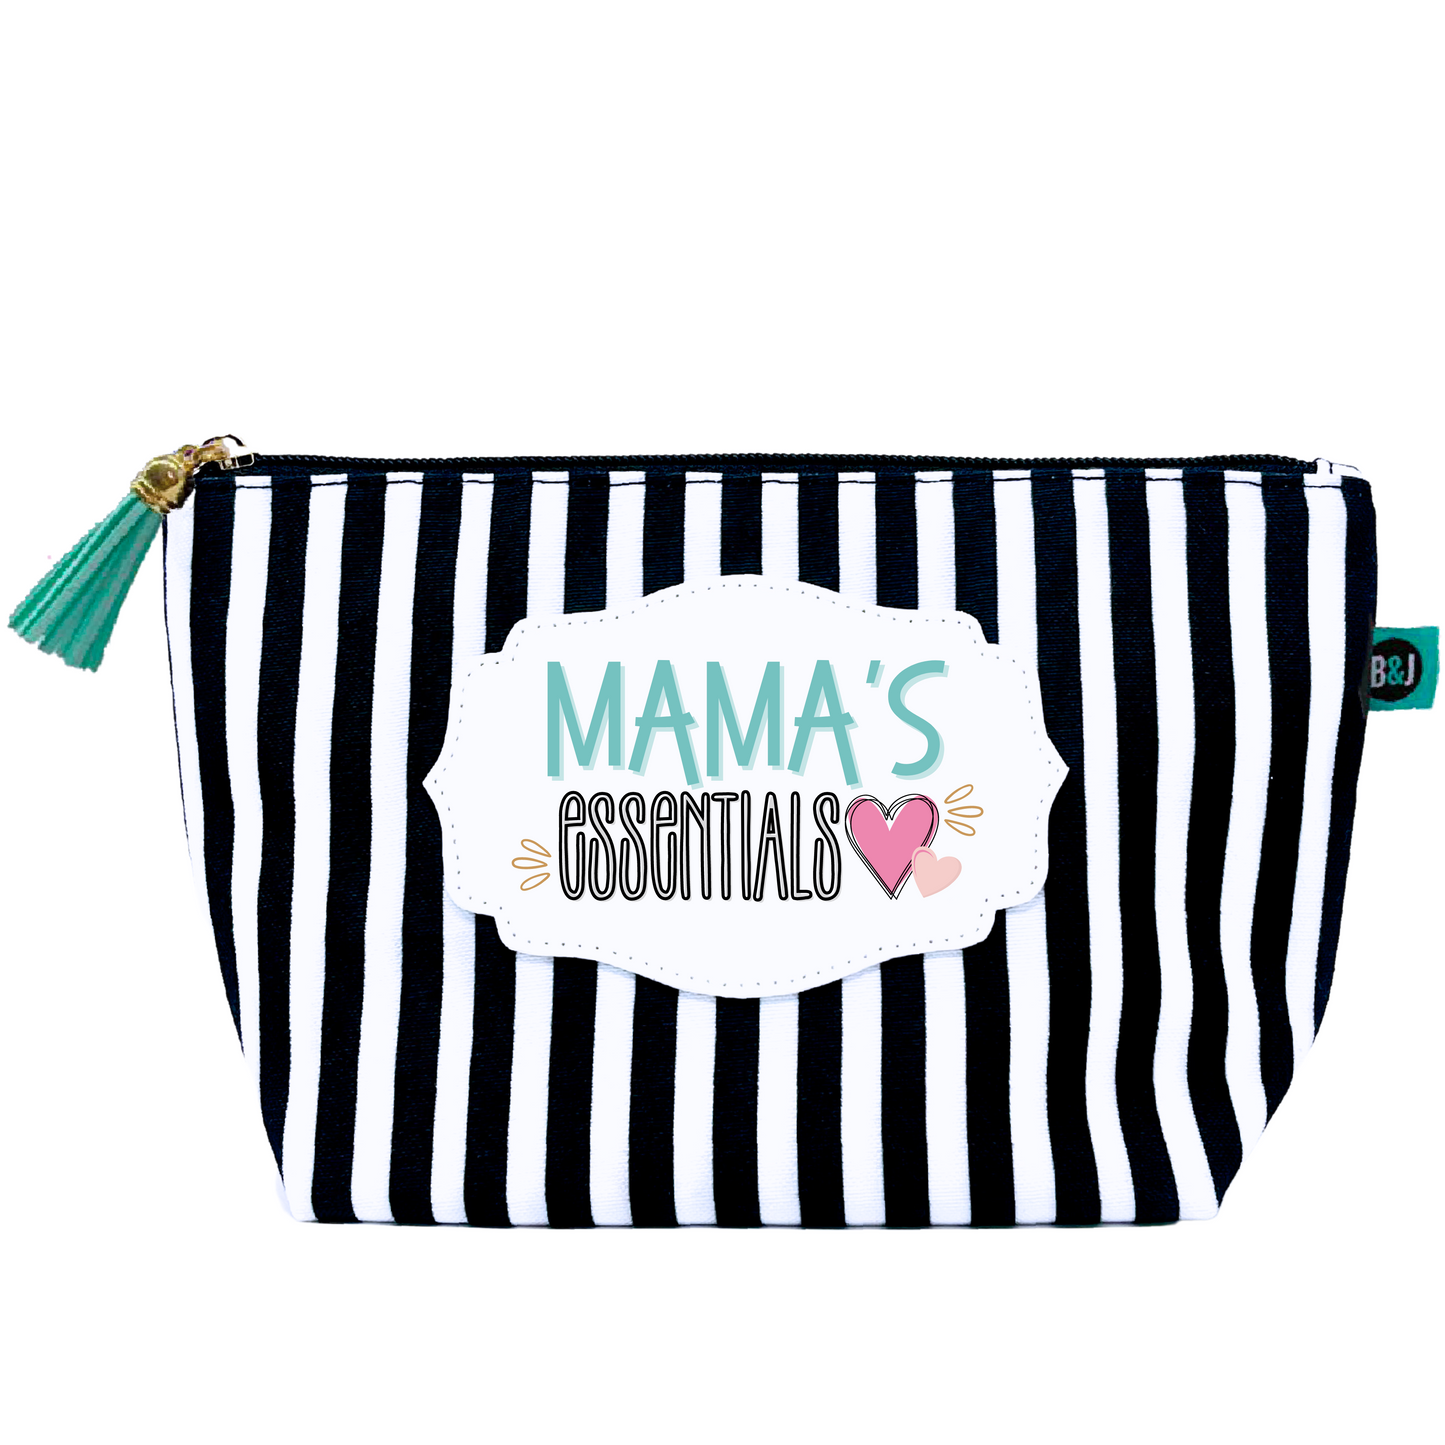 Mama's Essentials Janie Pouch Gifts for Women Striped Makeup Bags Cosmetic Bag Travel Toiletry Makeup Pouch Pencil Bag with Zipper Best Mama Mommy Mother Birthday Just Because Gifts